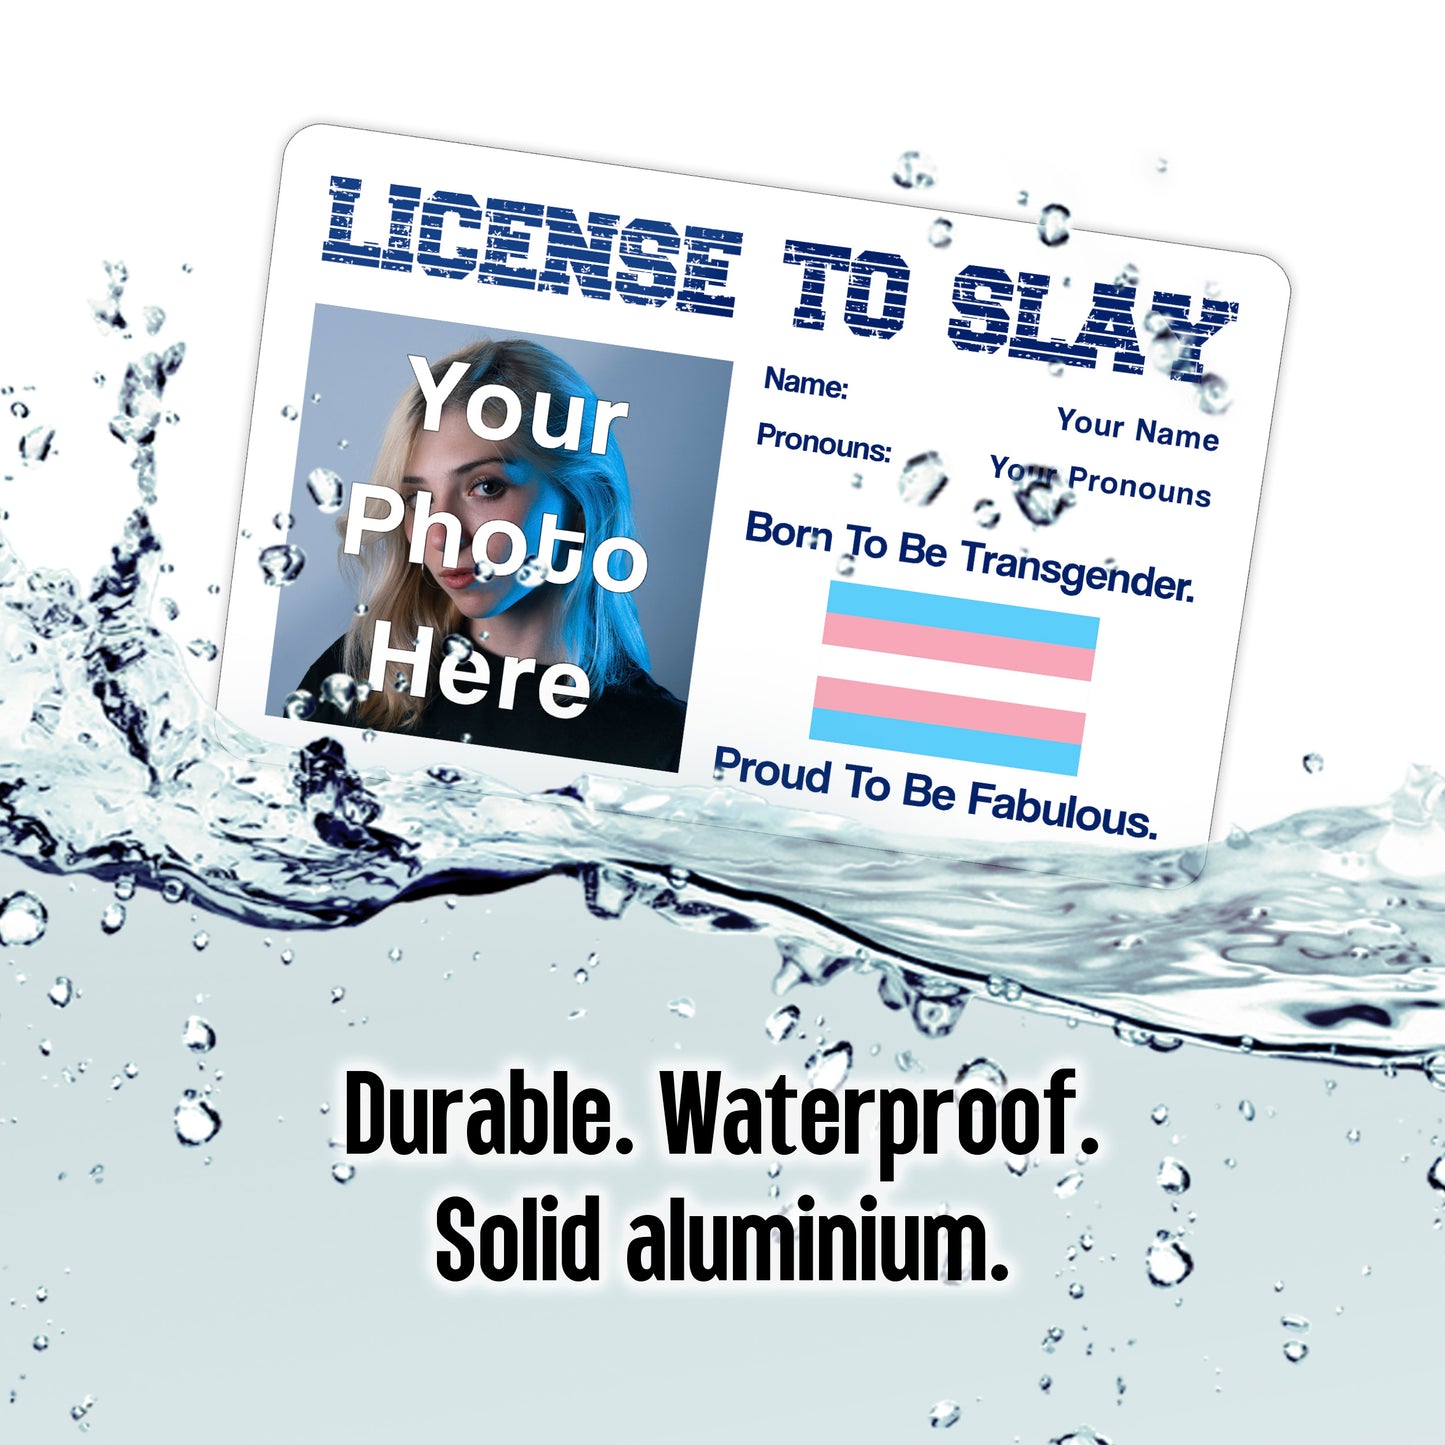 License to slay aluminium wallet card personalised with your name pronouns photo and the transgender pride flag